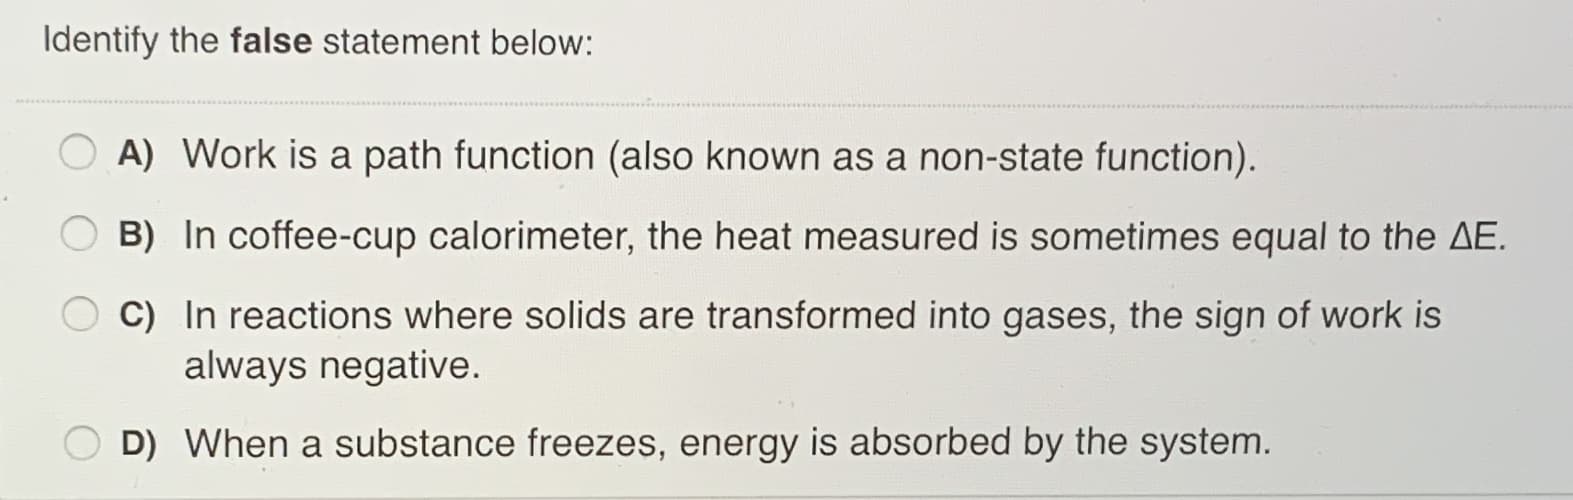 Identify the false statement below:
A) Work is a path function (also known as a non-state function).
B) In coffee-cup calorimeter, the heat measured is sometimes equal to the AE.
C) In reactions where solids are transformed into gases, the sign of work is
always negative.
O D) When a substance freezes, energy is absorbed by the system.
